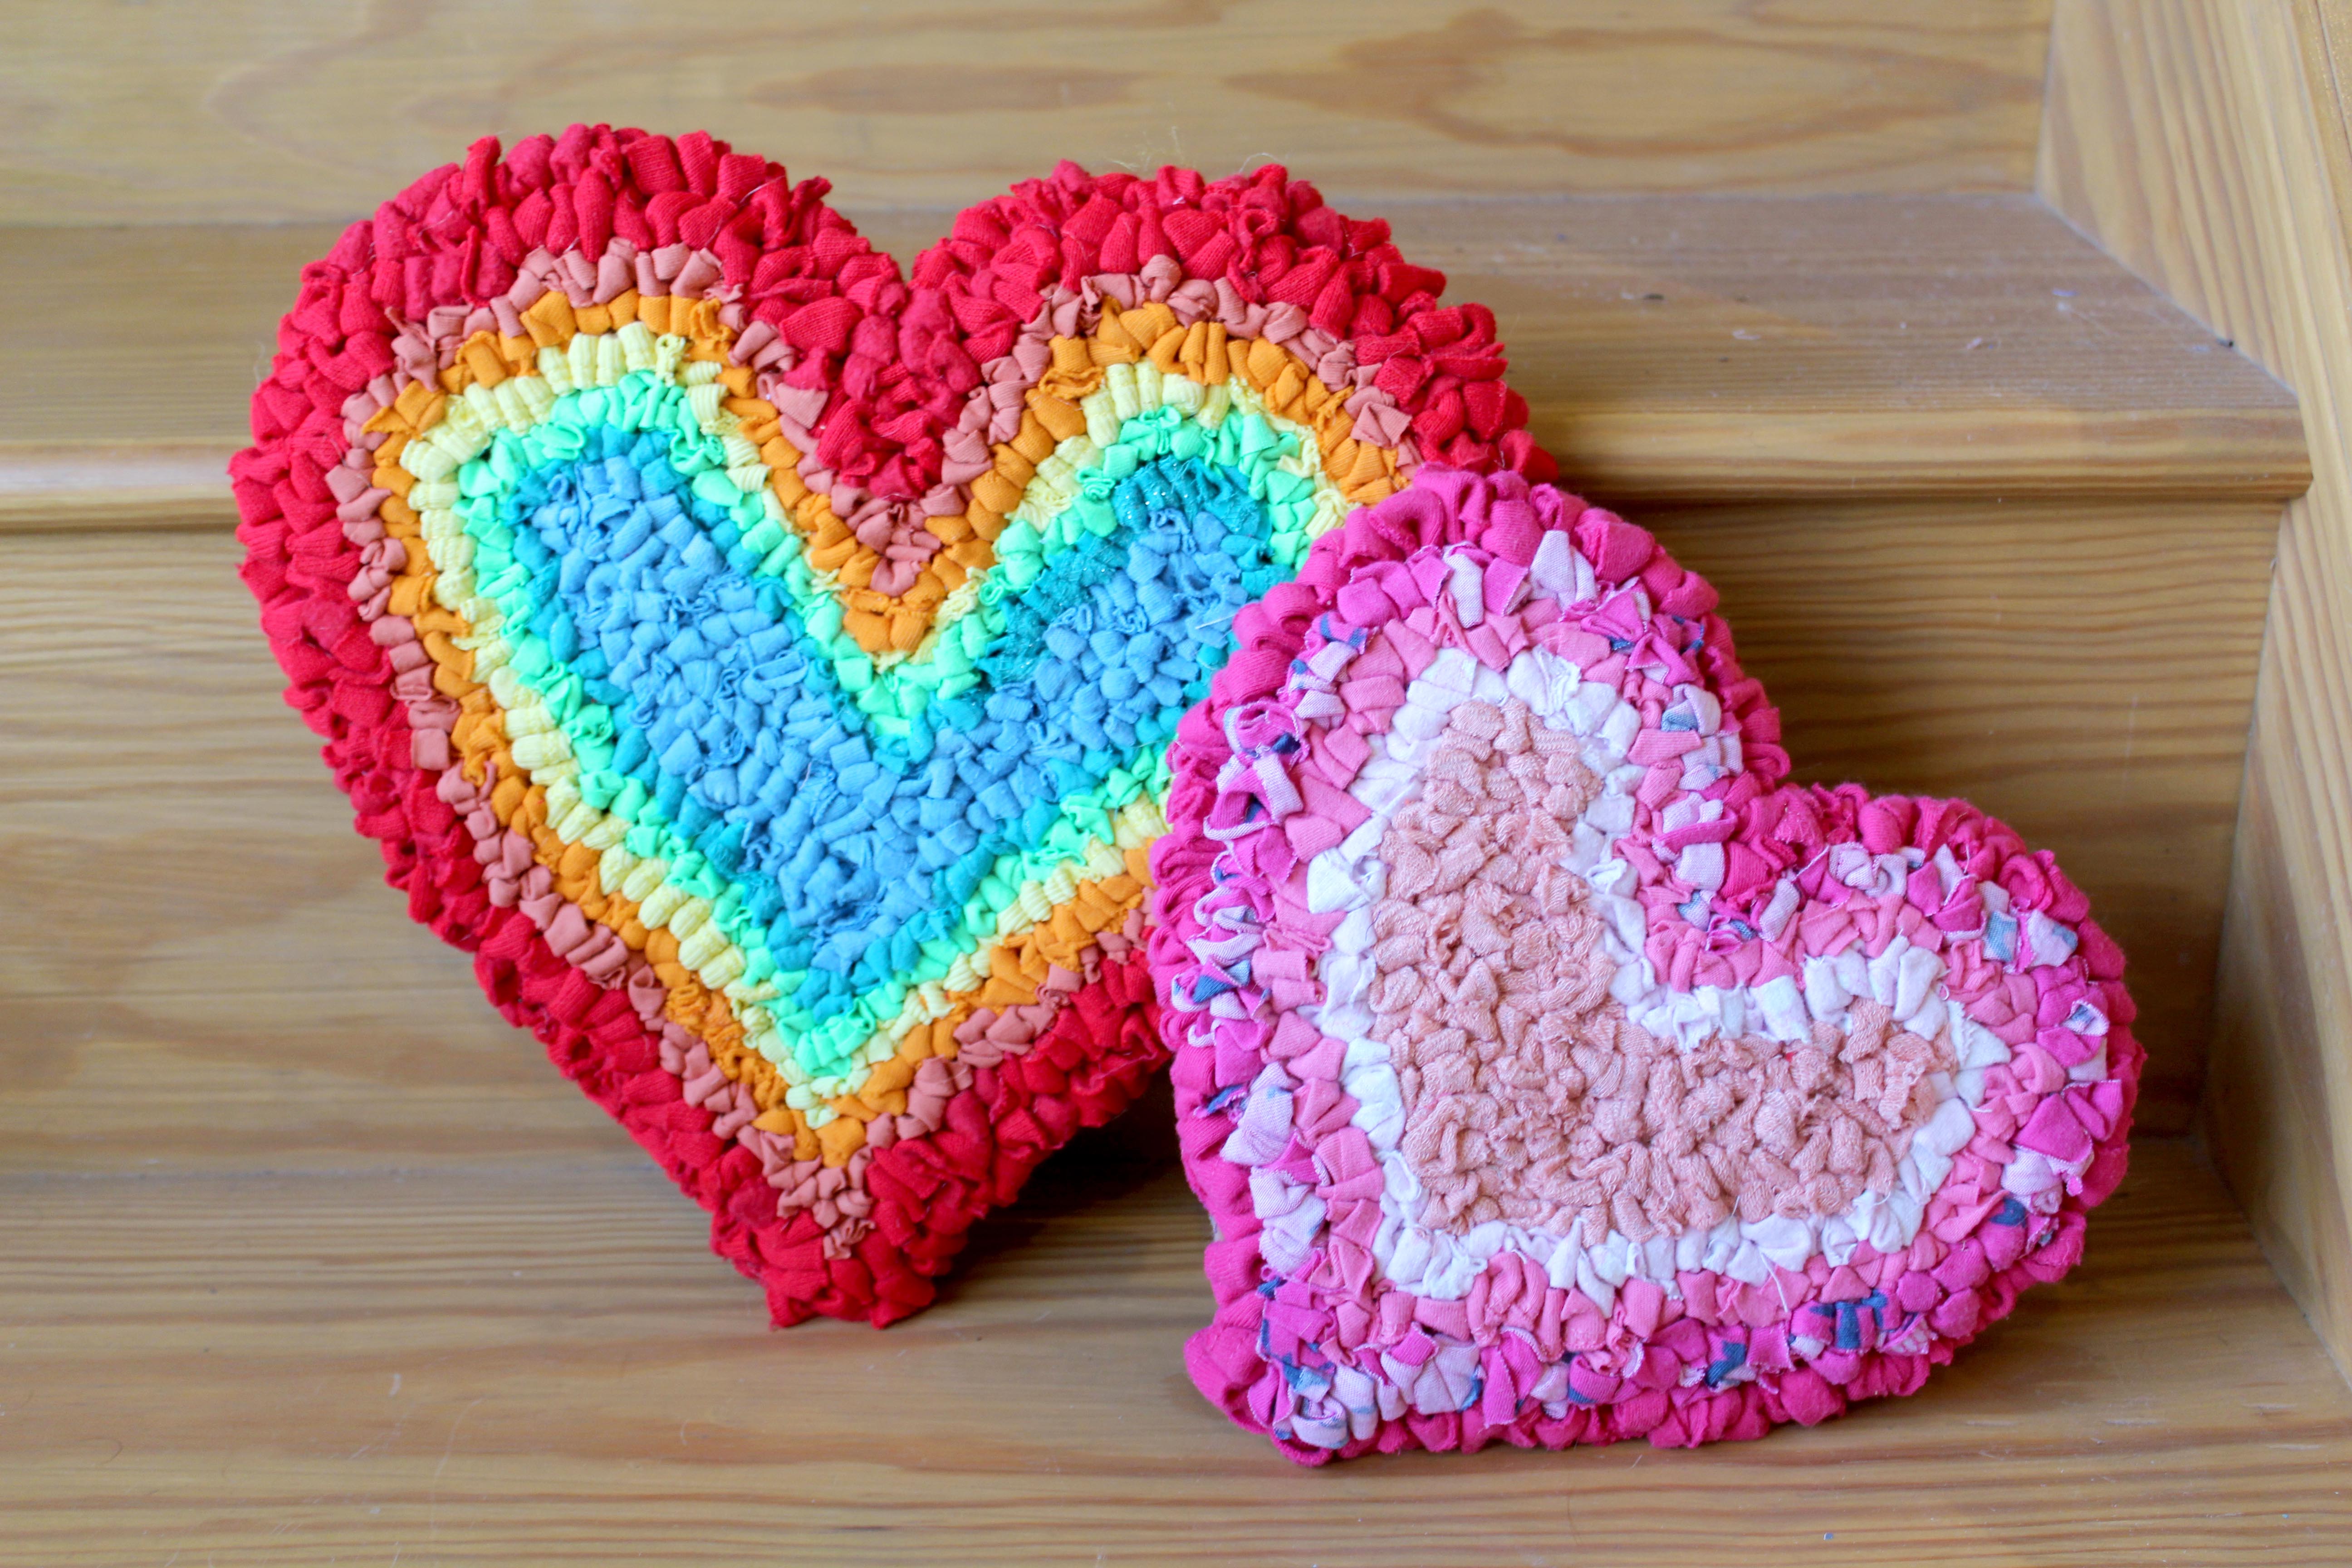 Rag Rug rainbow heart and pink heart made out of upcycled clothing